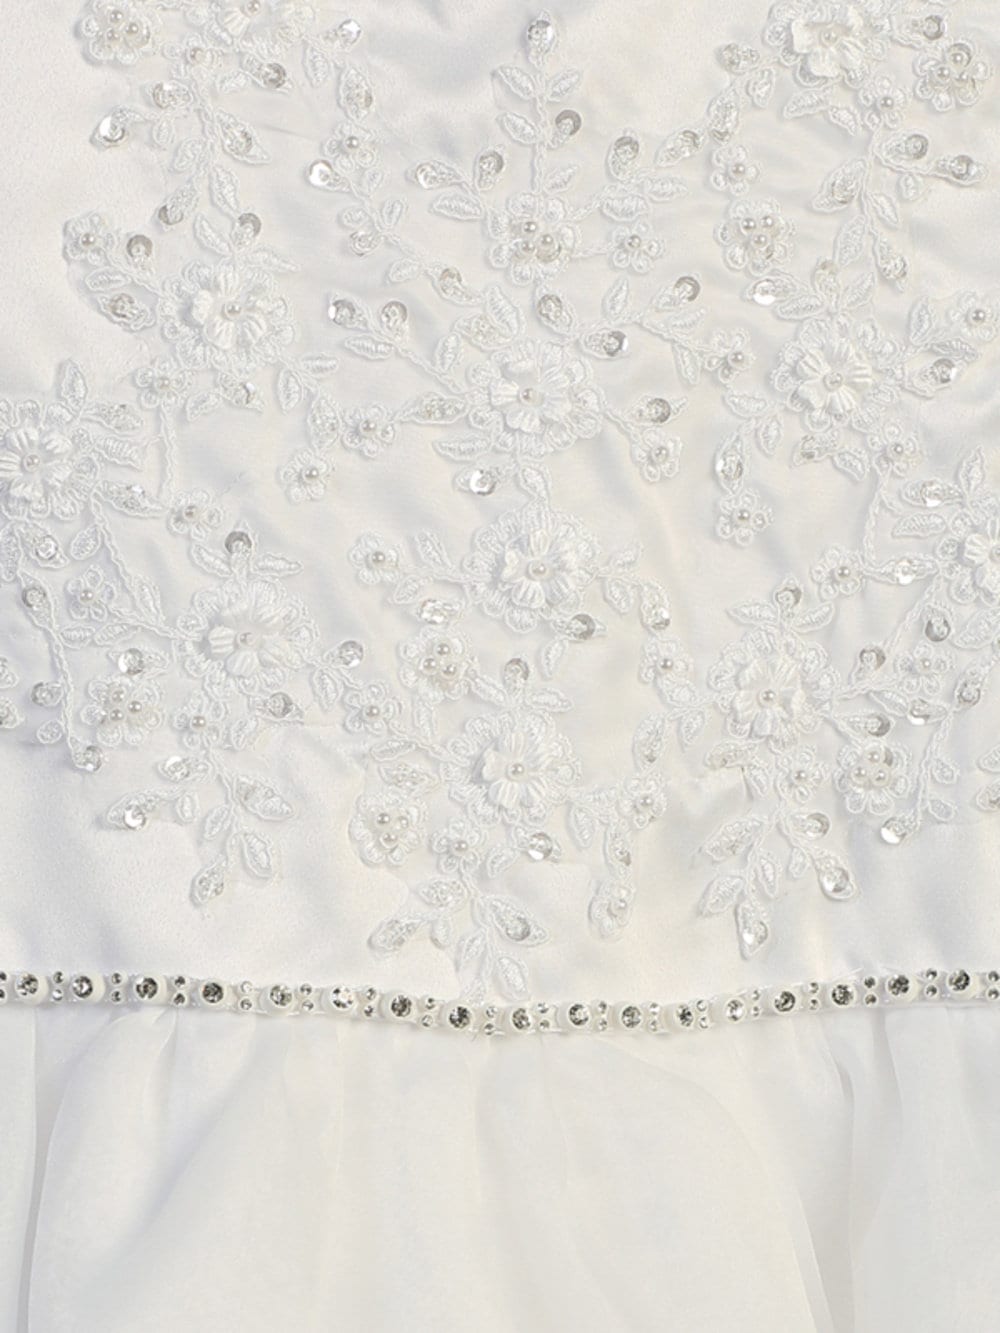 A view of the rhinestone trim on the waist and the three layers of the organza skirt.